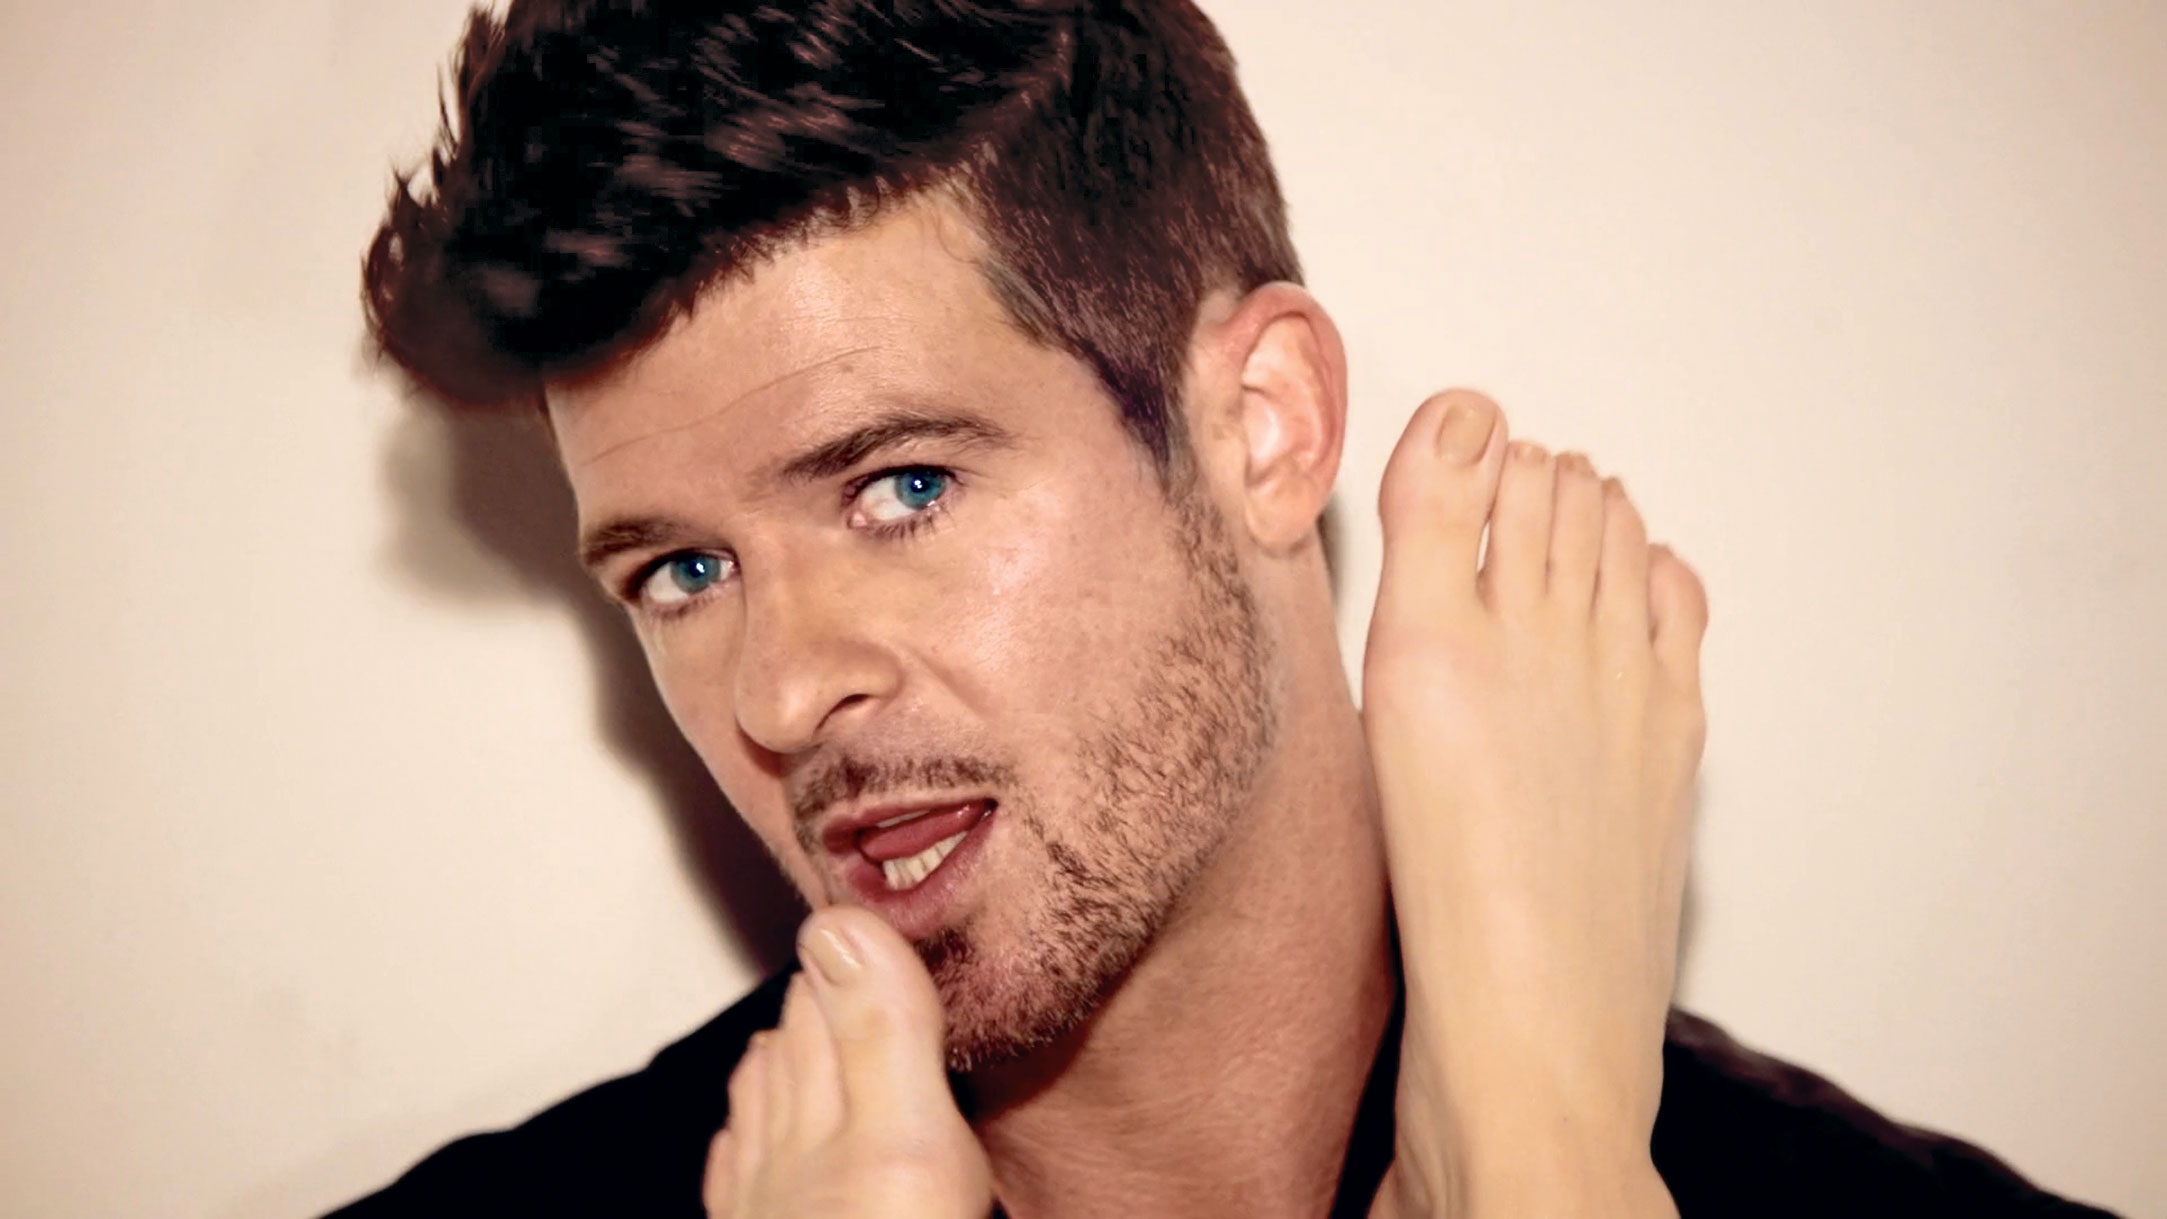 #askthicke hashtag goes horribly, predictably wrong